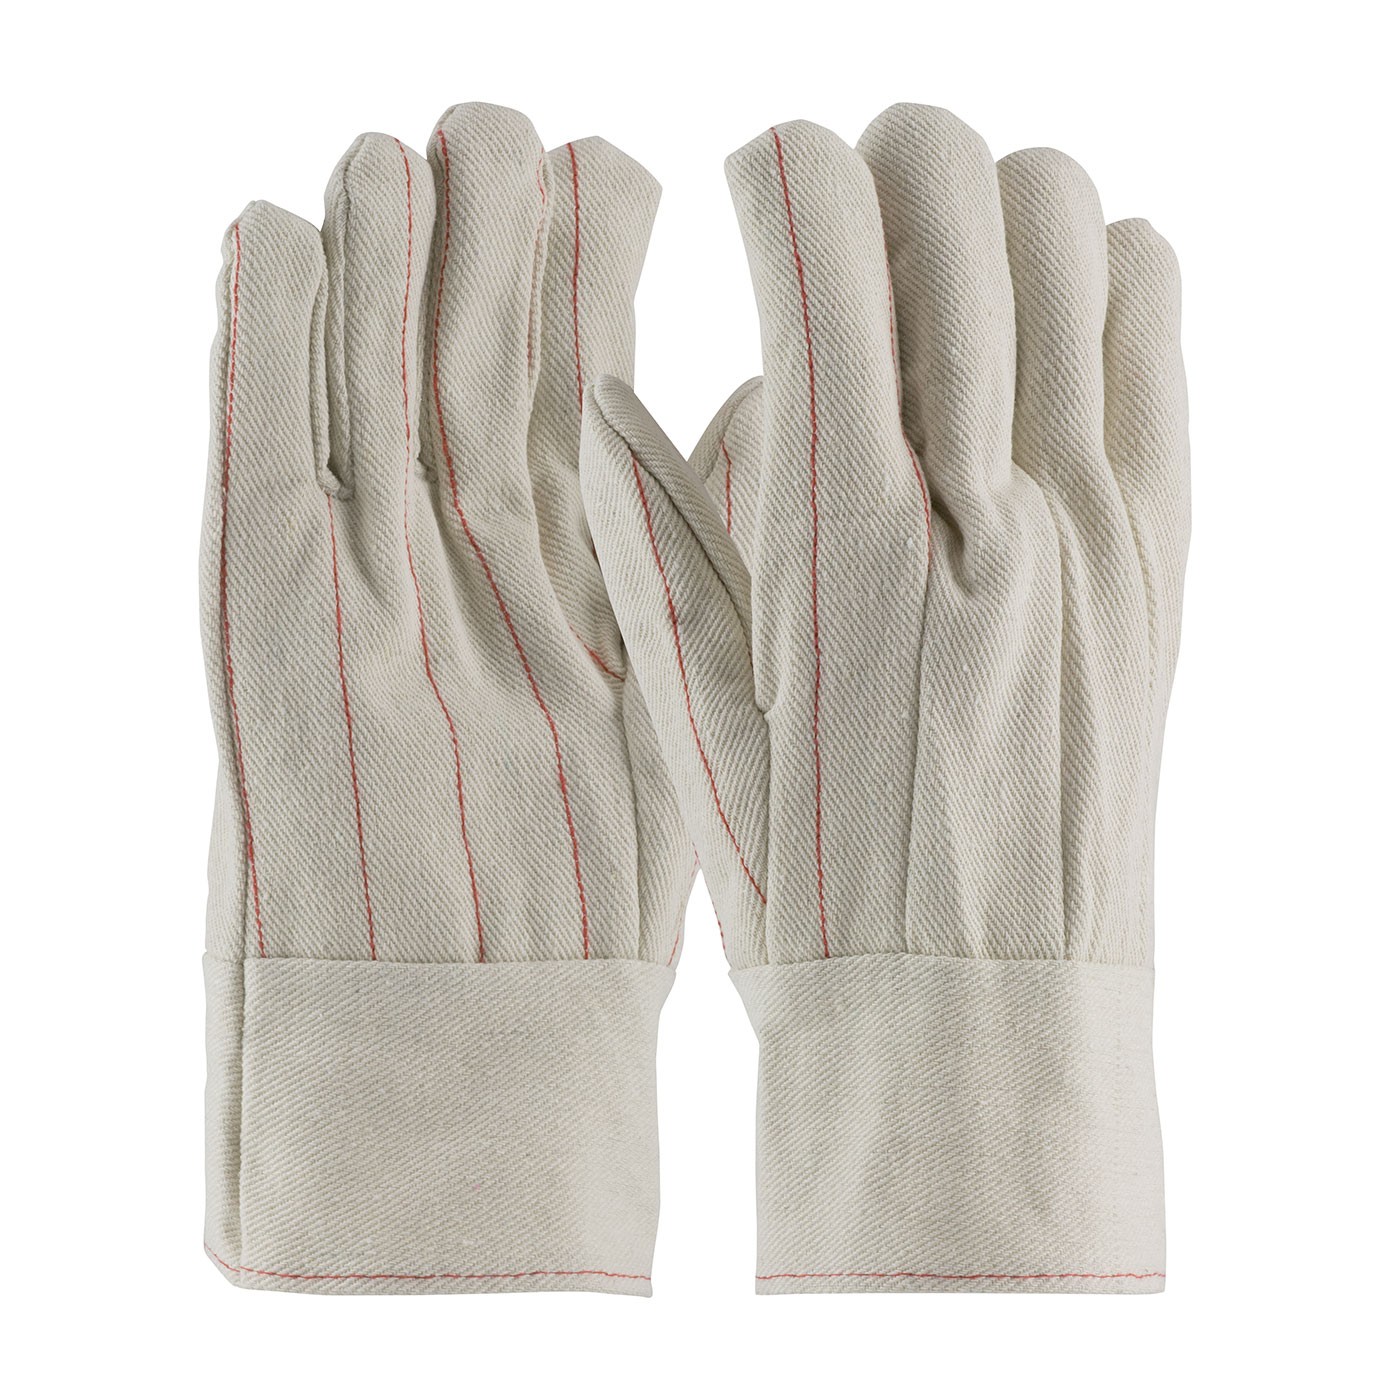 PIP® Cotton Canvas Double Palm Glove with Nap-in Finish - Band Top  (#92-918BT)